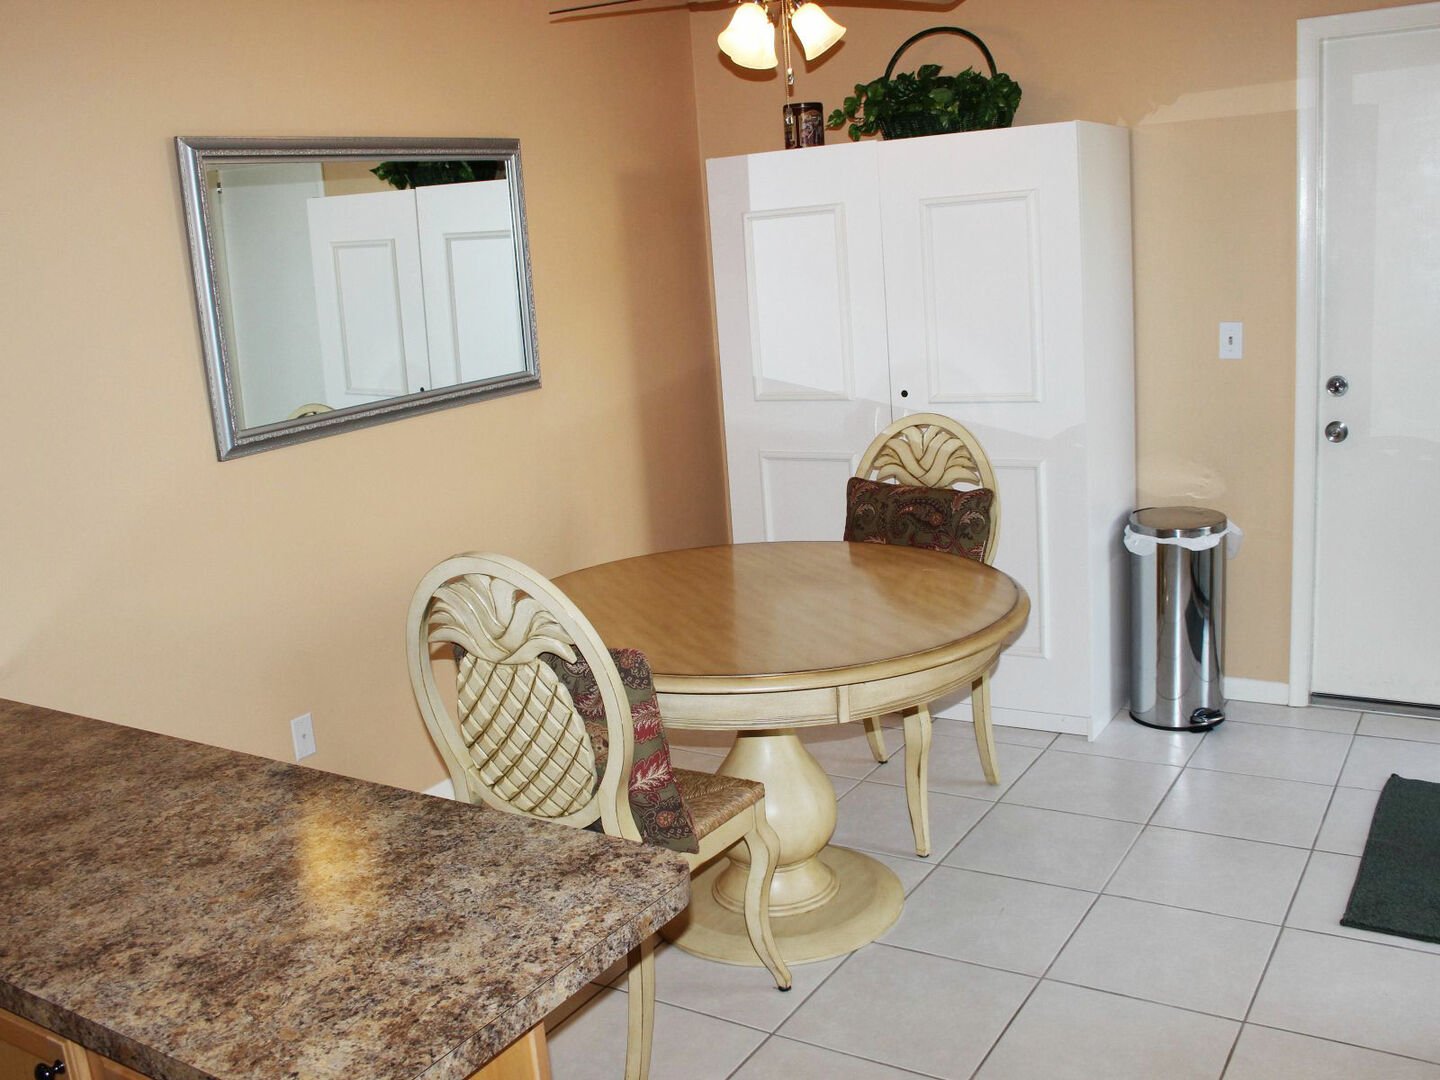 Eat-in kitchen with seating for 2.